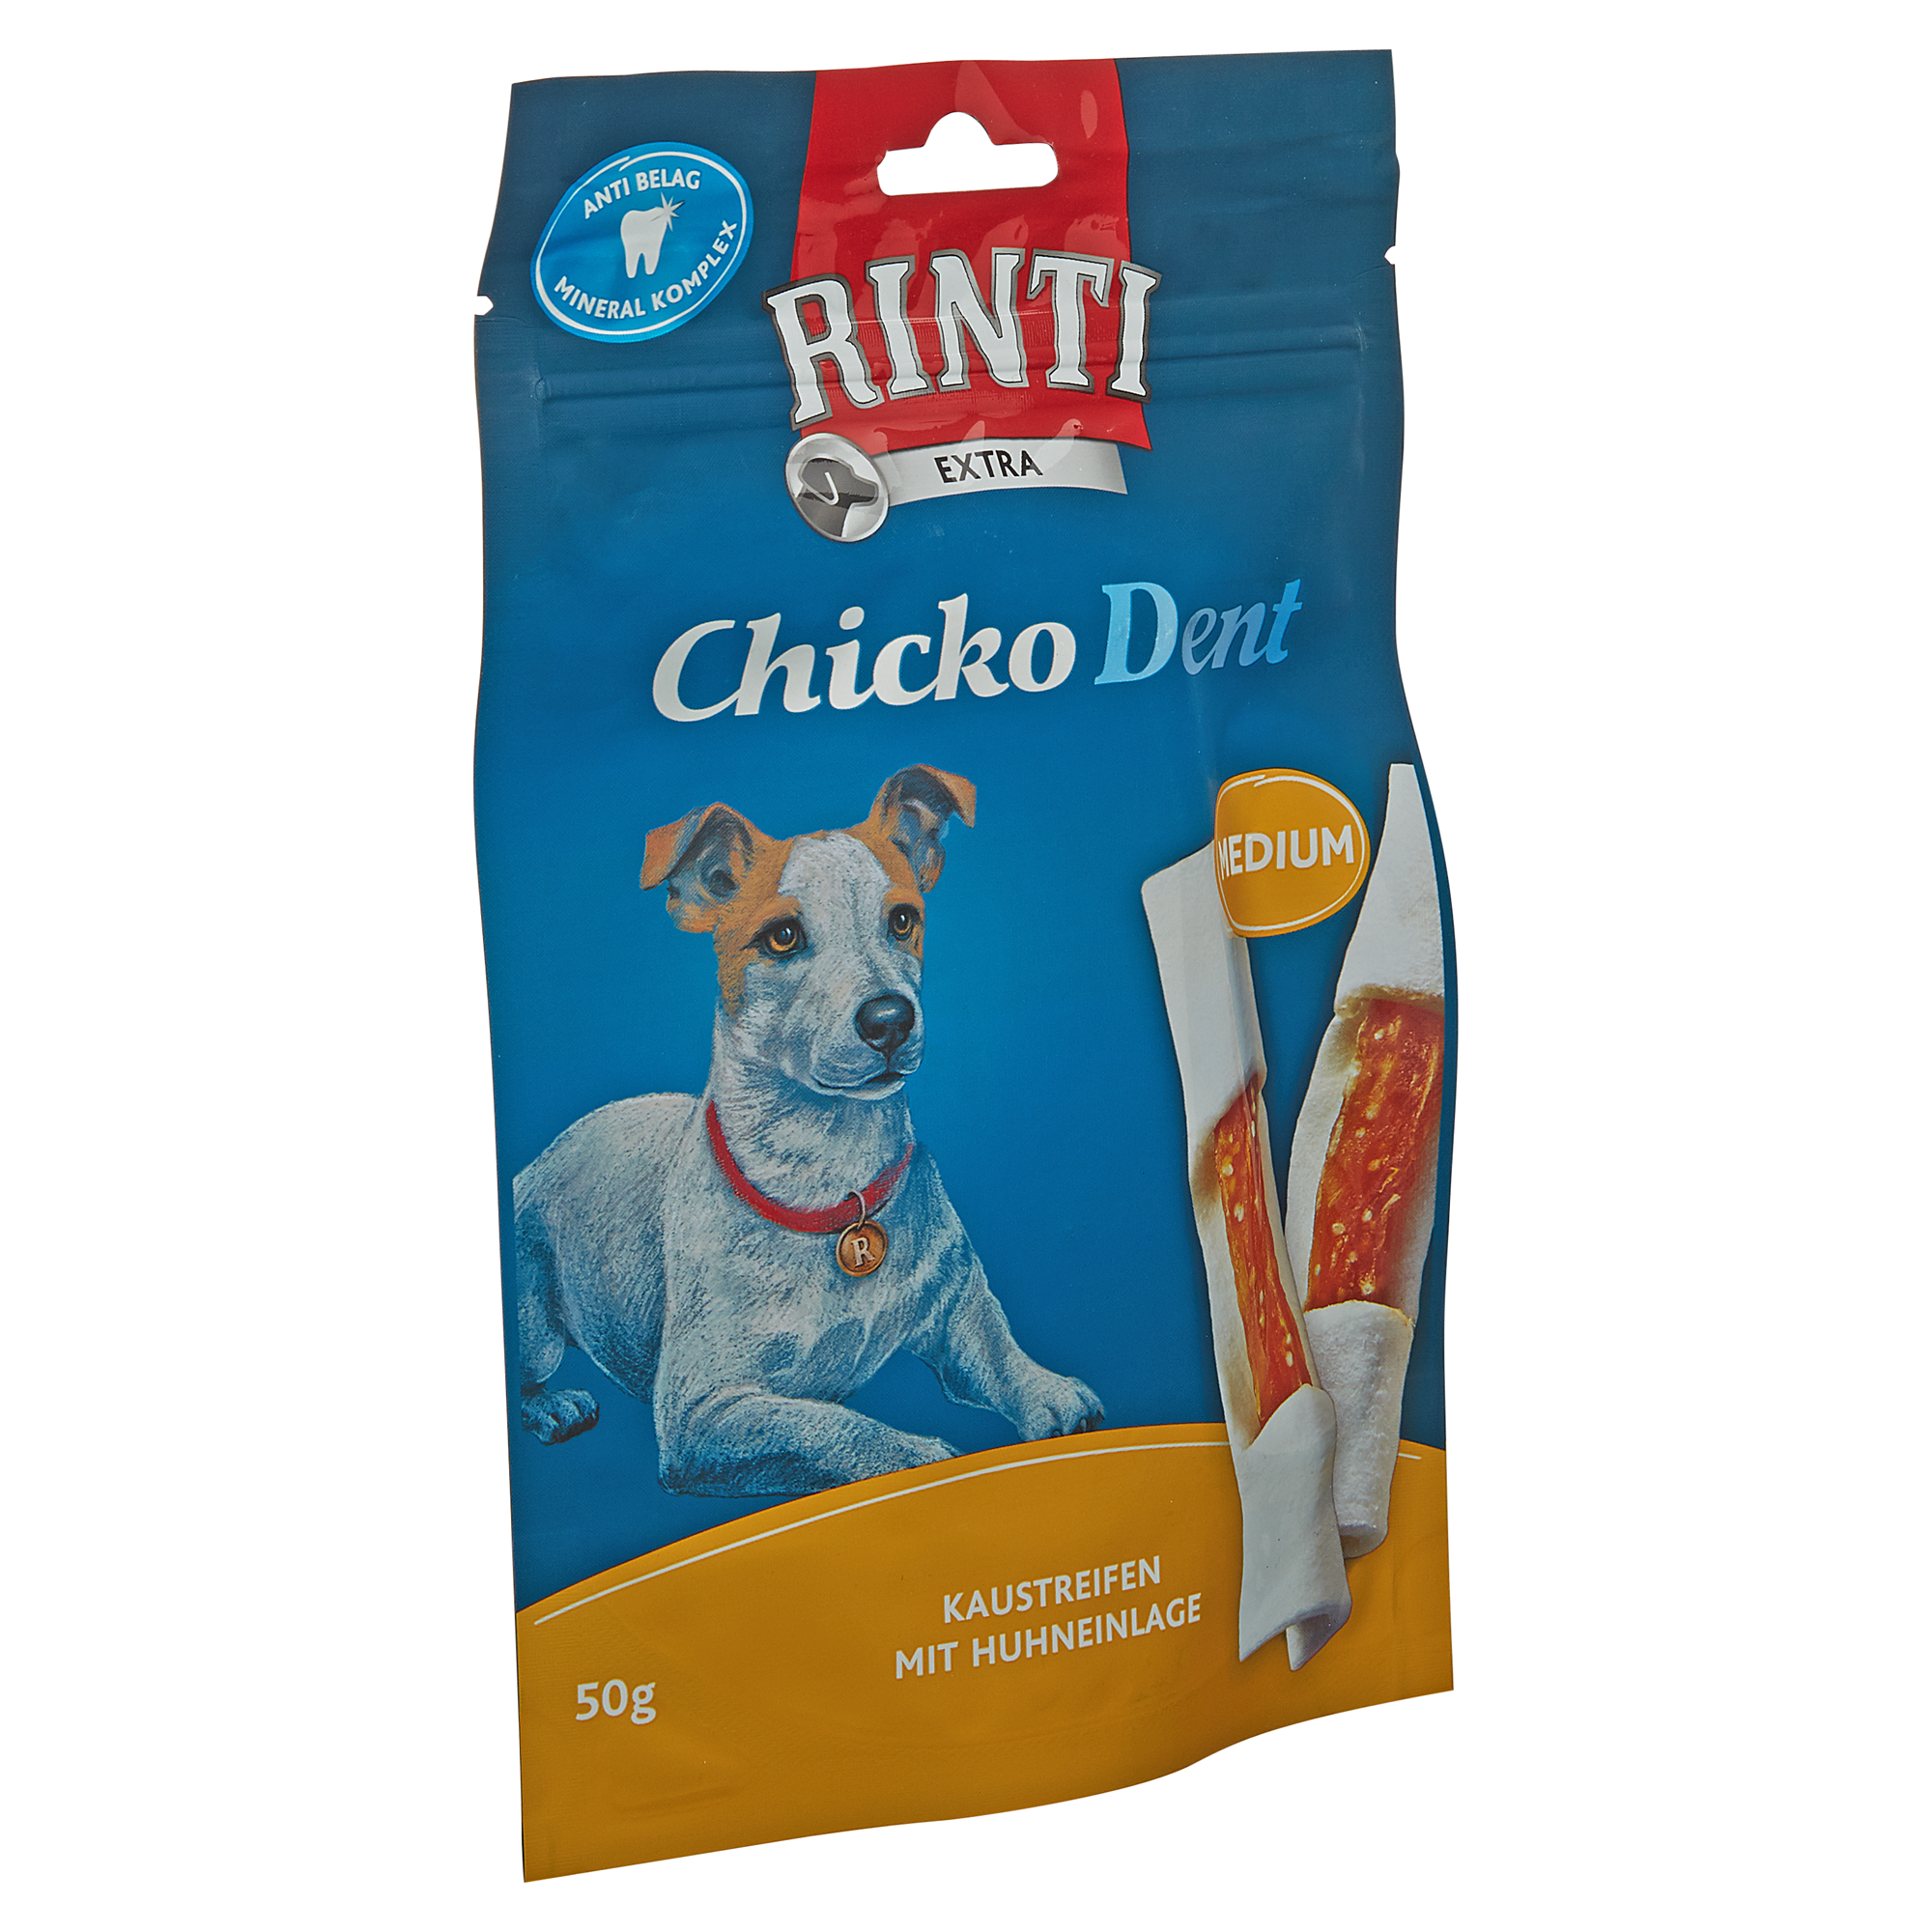 Hundesnack "Chicko" Dent Extra Medium mit Huhn 50 g + product picture